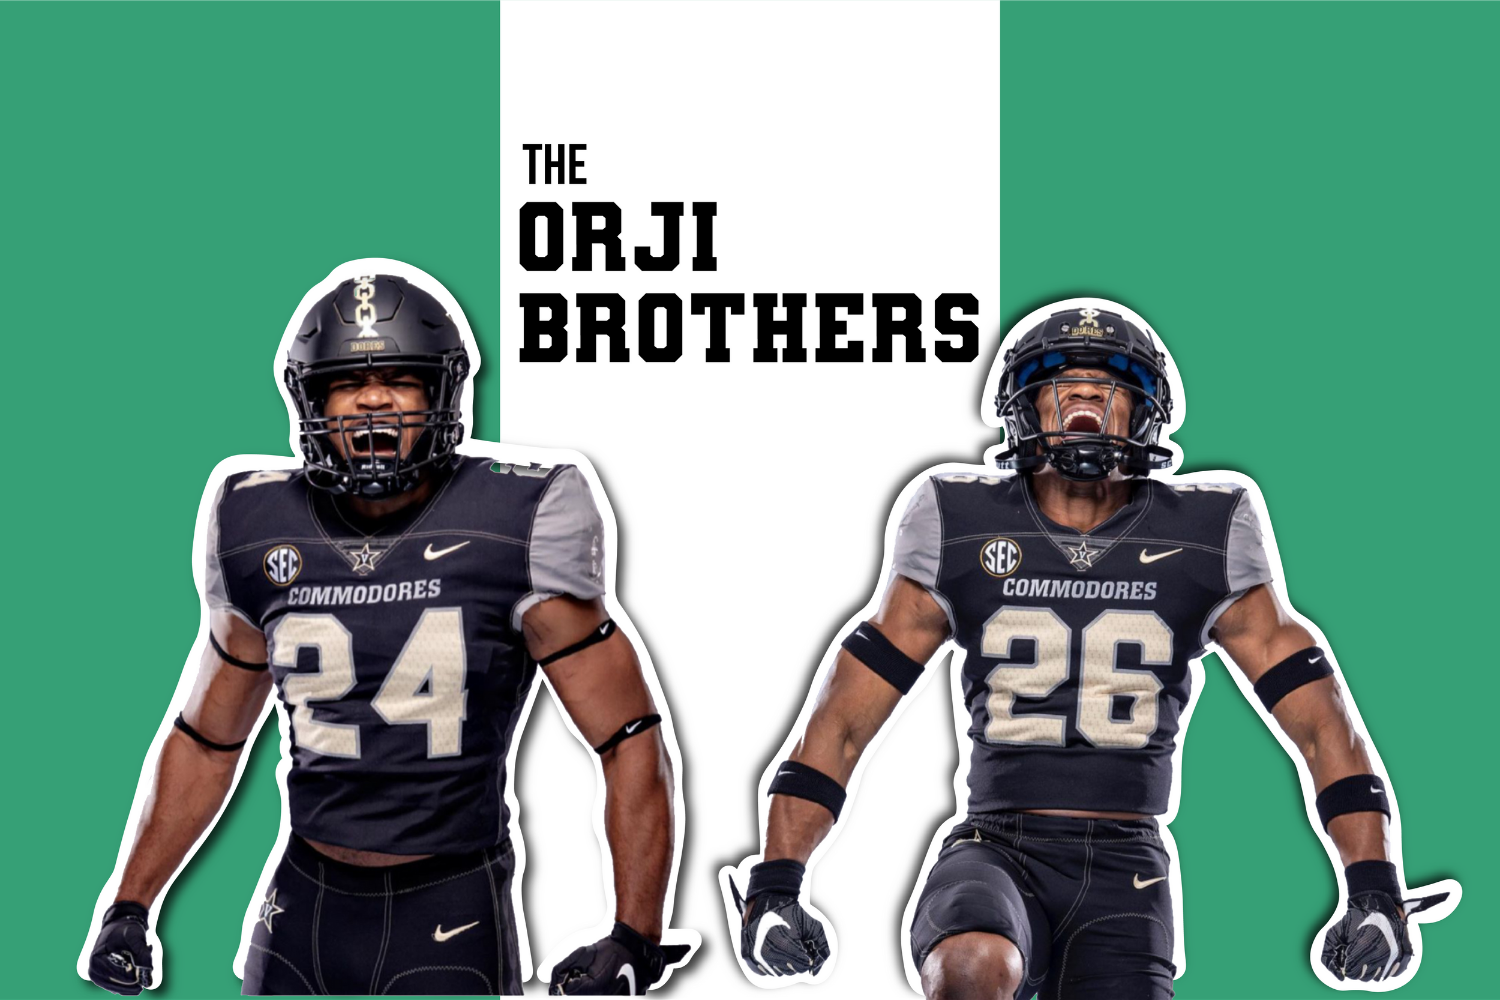 The Vanderbilt Hustler Instant Chemistry The Orji Brothers Bond On The Field Is Rooted In Family And Perspective